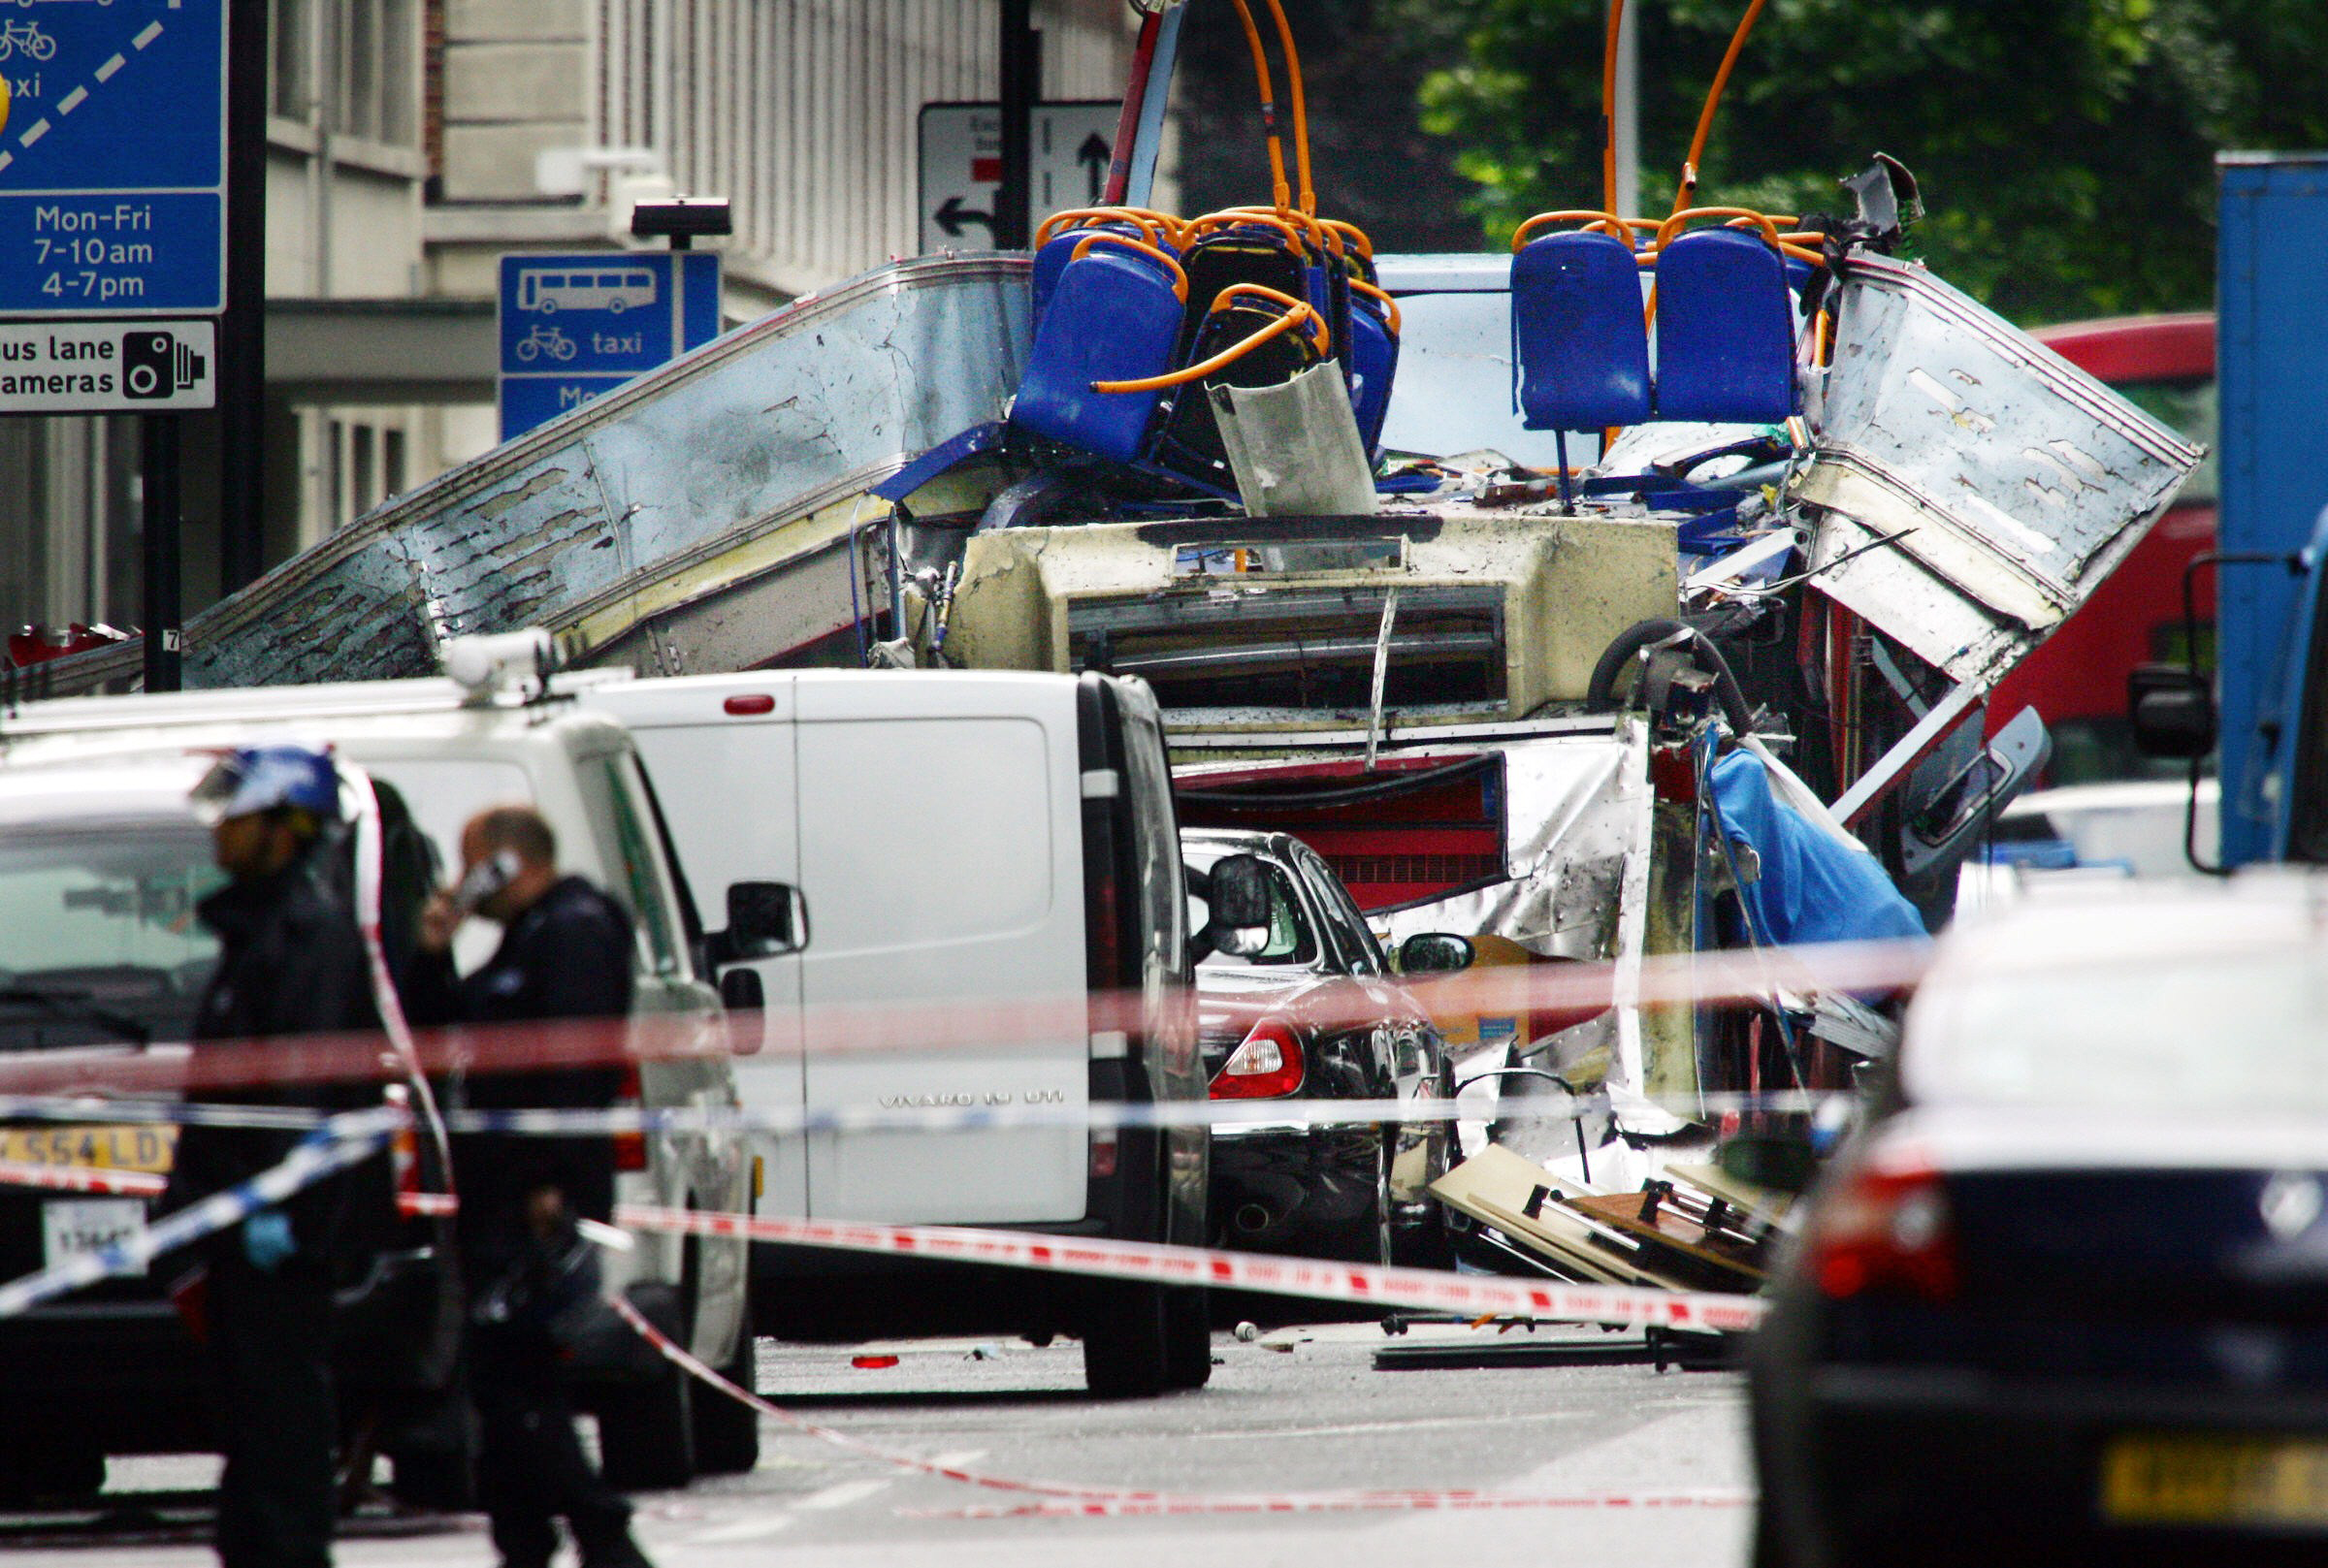 PHOTO: The remains of a double-decker bus after a bomb exploded in Woburn Place and Tavistock Square in London, July 7, 2005. Explosions ripped through three underground trains and a bus in London in a wave of "terrorist attacks." 